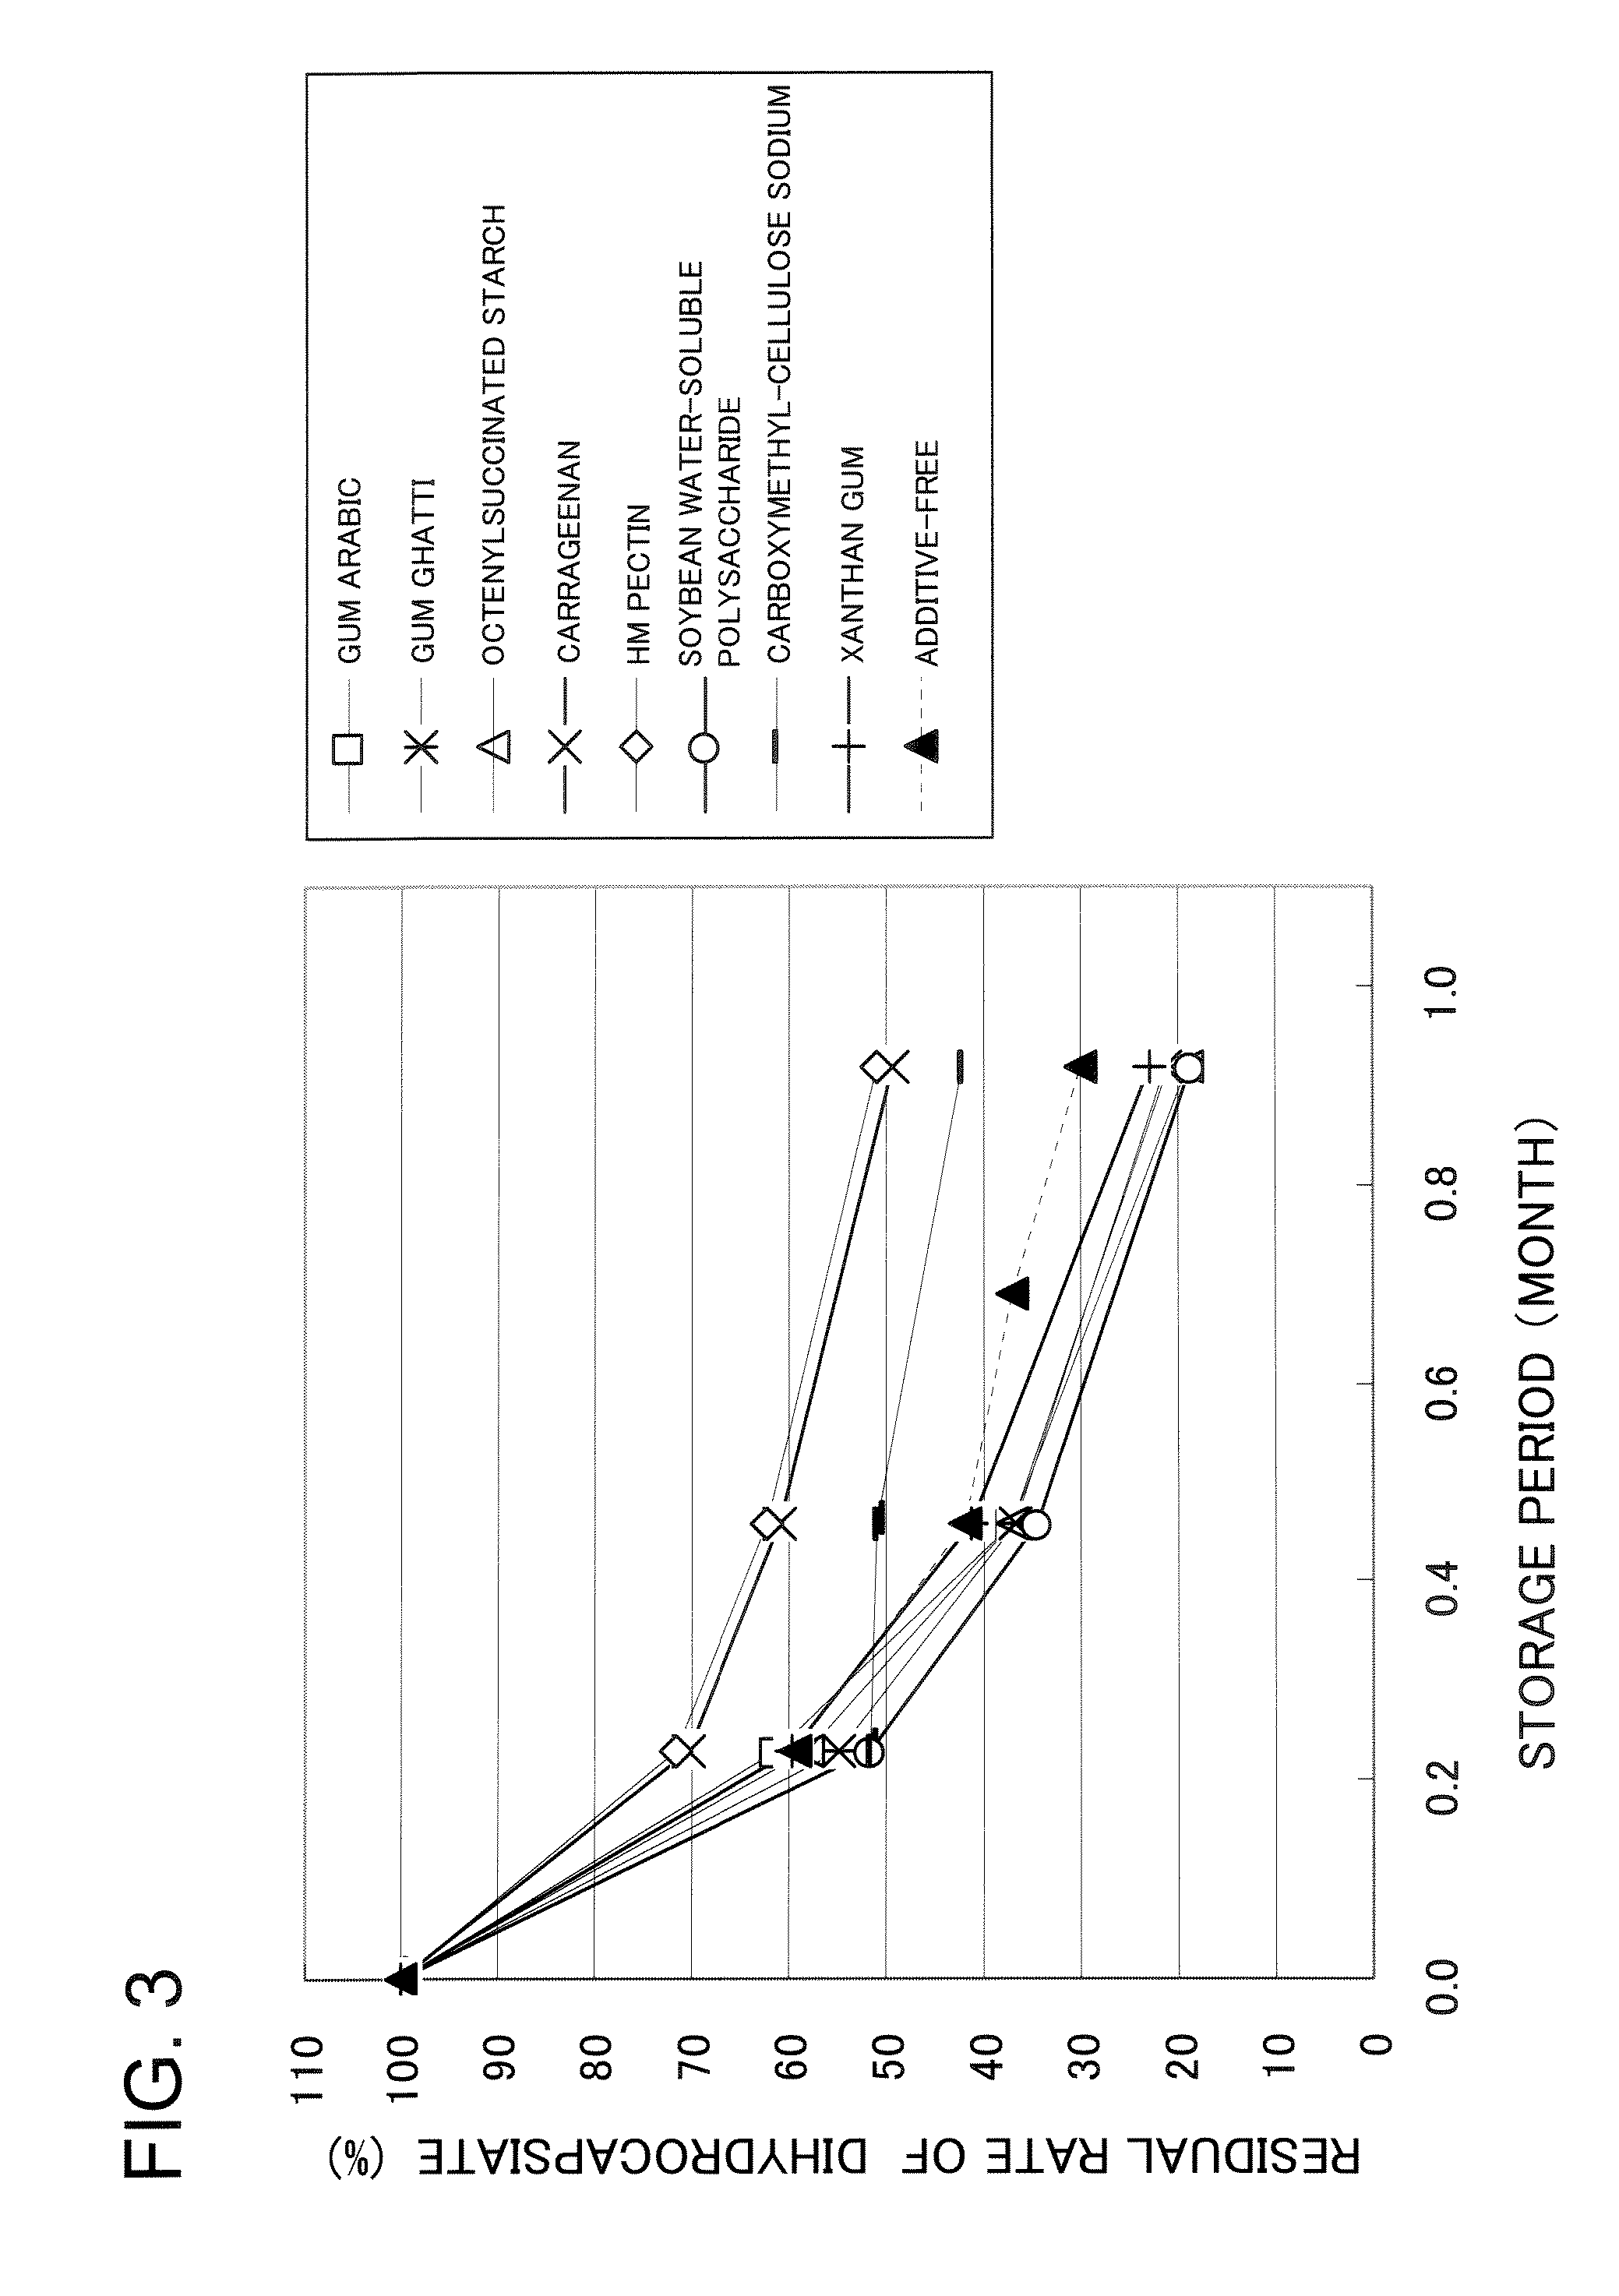 Process of producing a capsinoid-containing food and drink